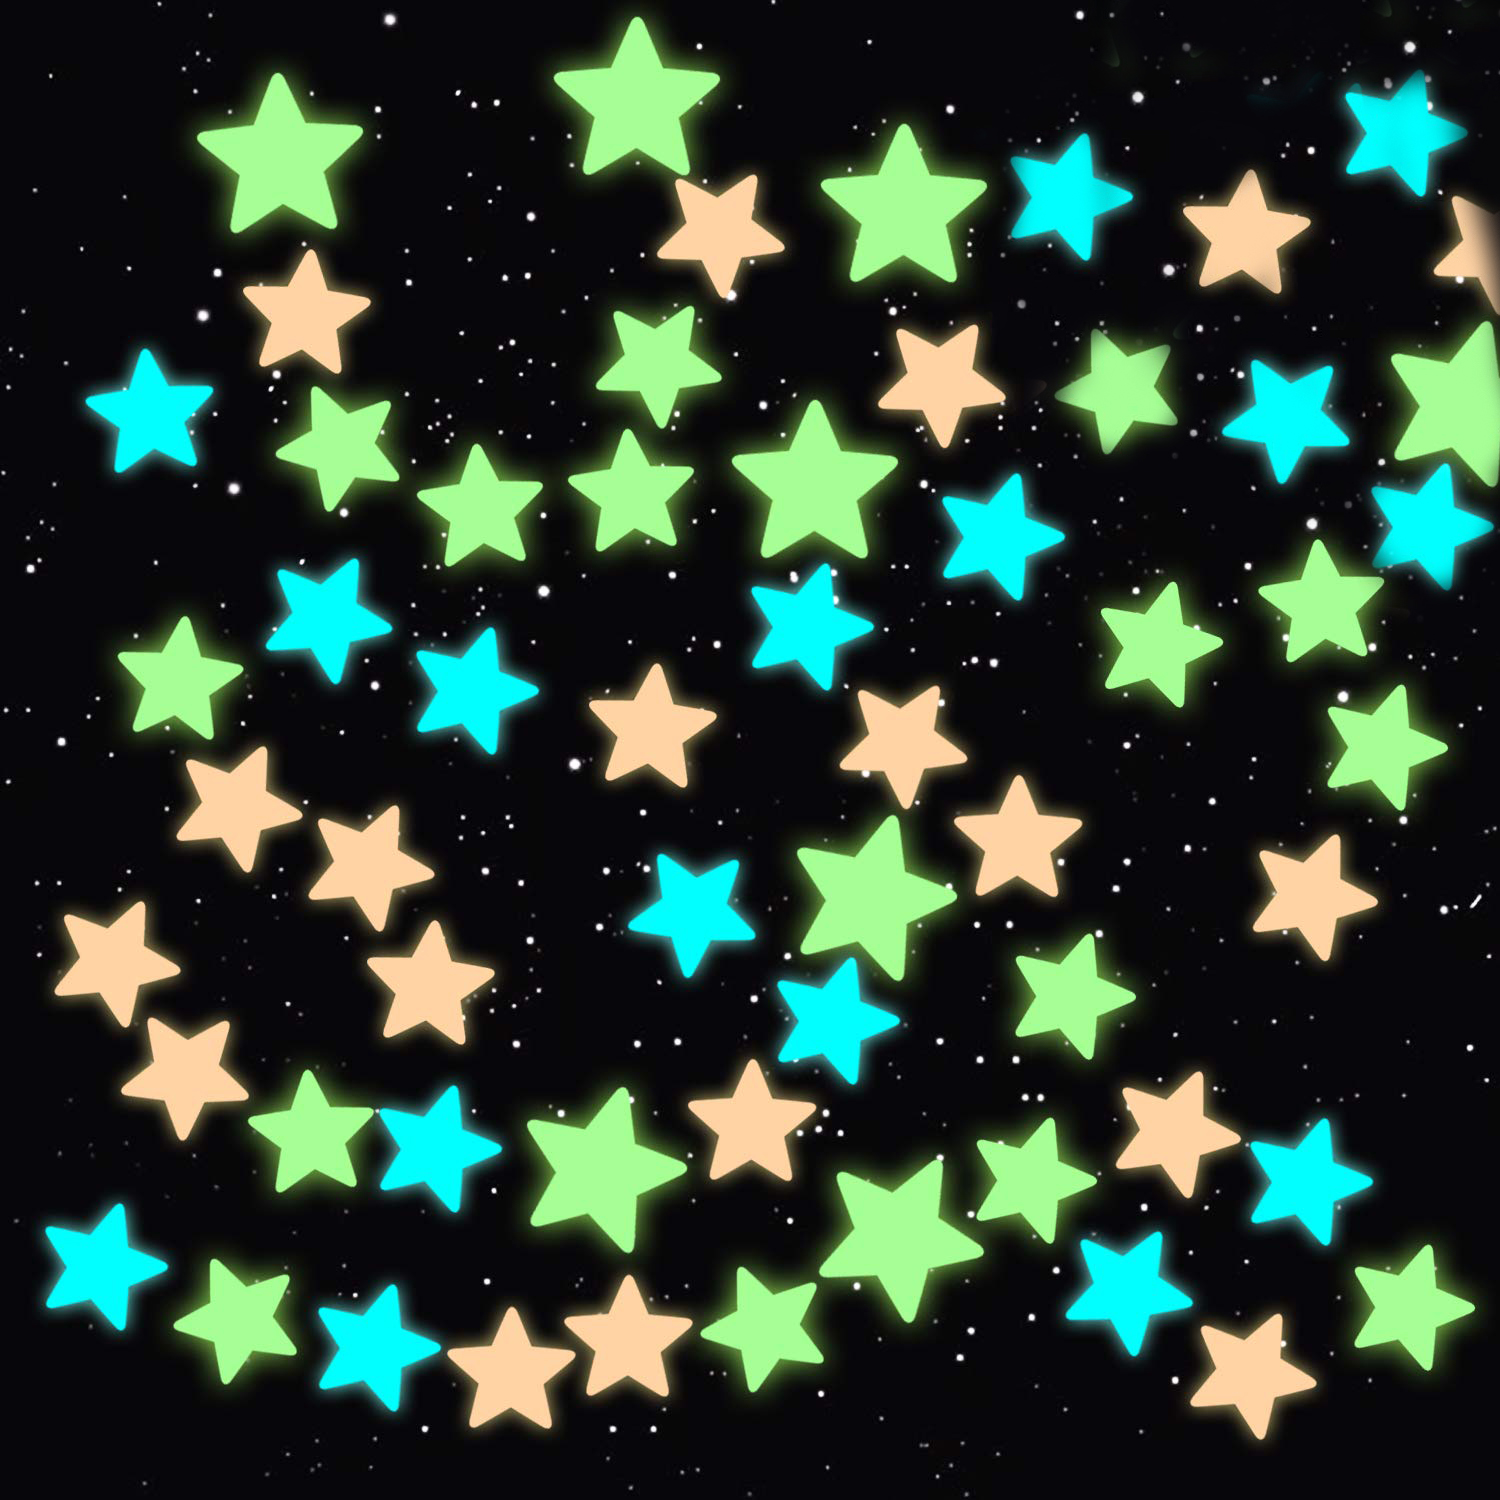 Glow in The Dark Luminous Stars 3D Wall Stickers for Kids Room